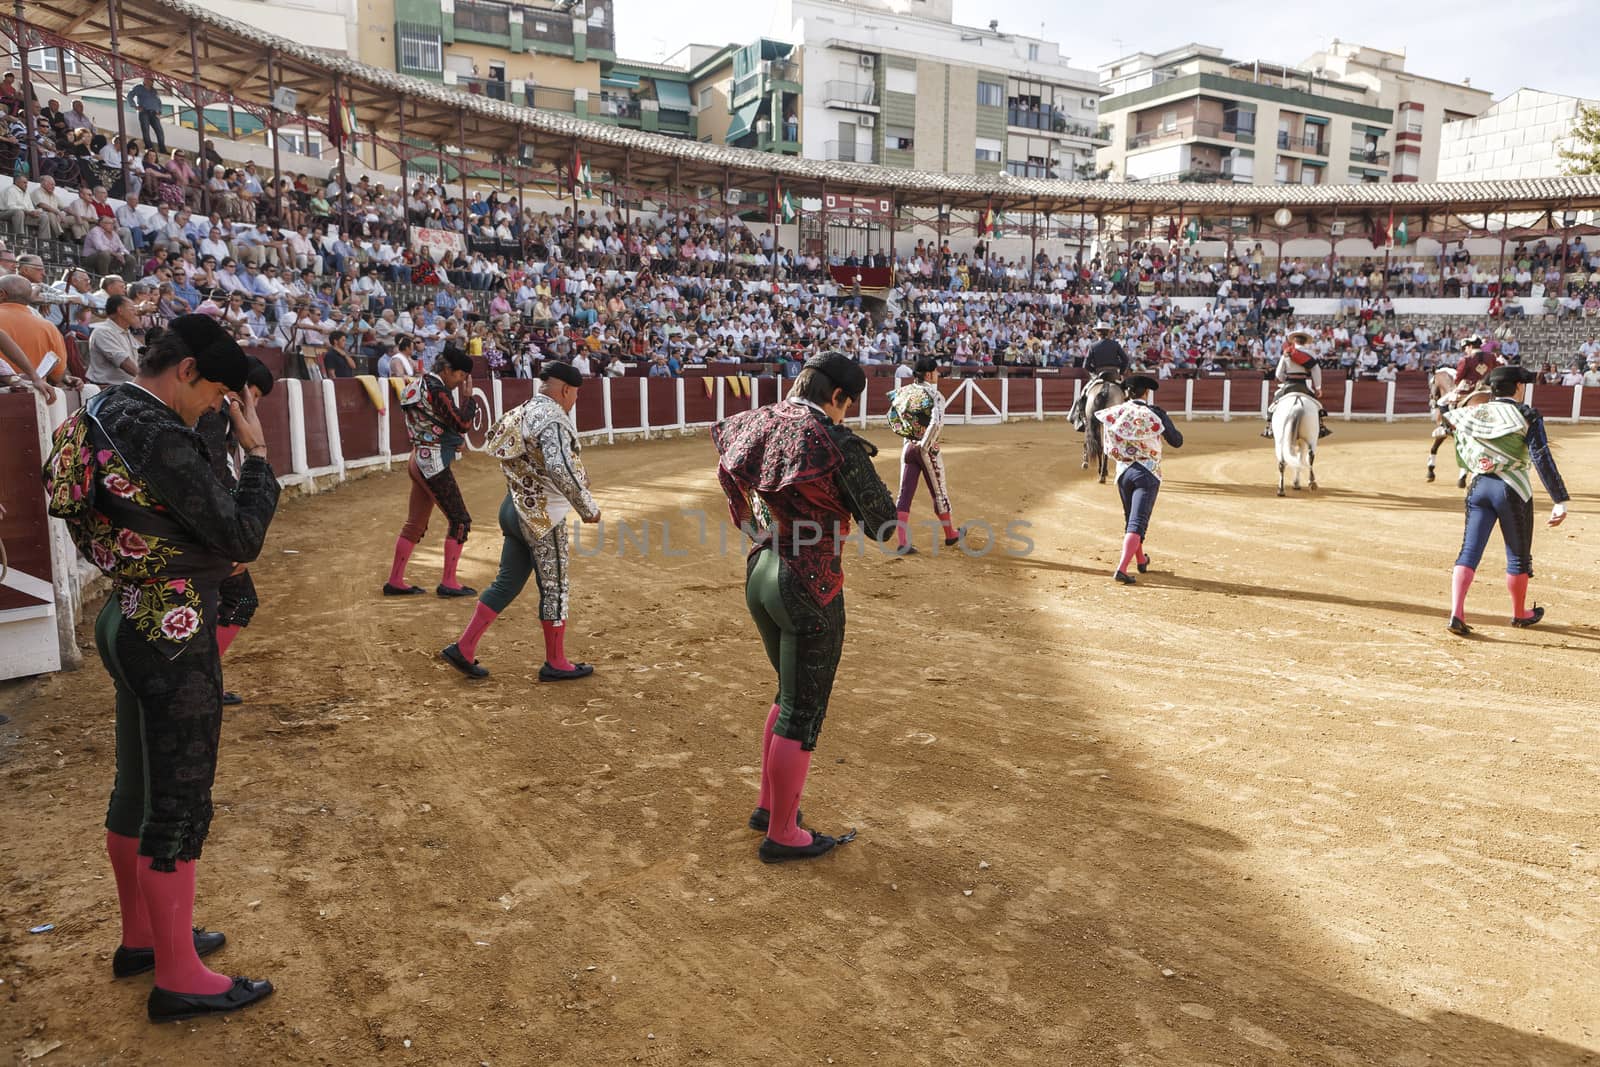 Ubeda, Jaen province, SPAIN - 2 october 2010: Spanish bullfighters at the paseillo or initial parade in Ubeda, Jaen province, Spain